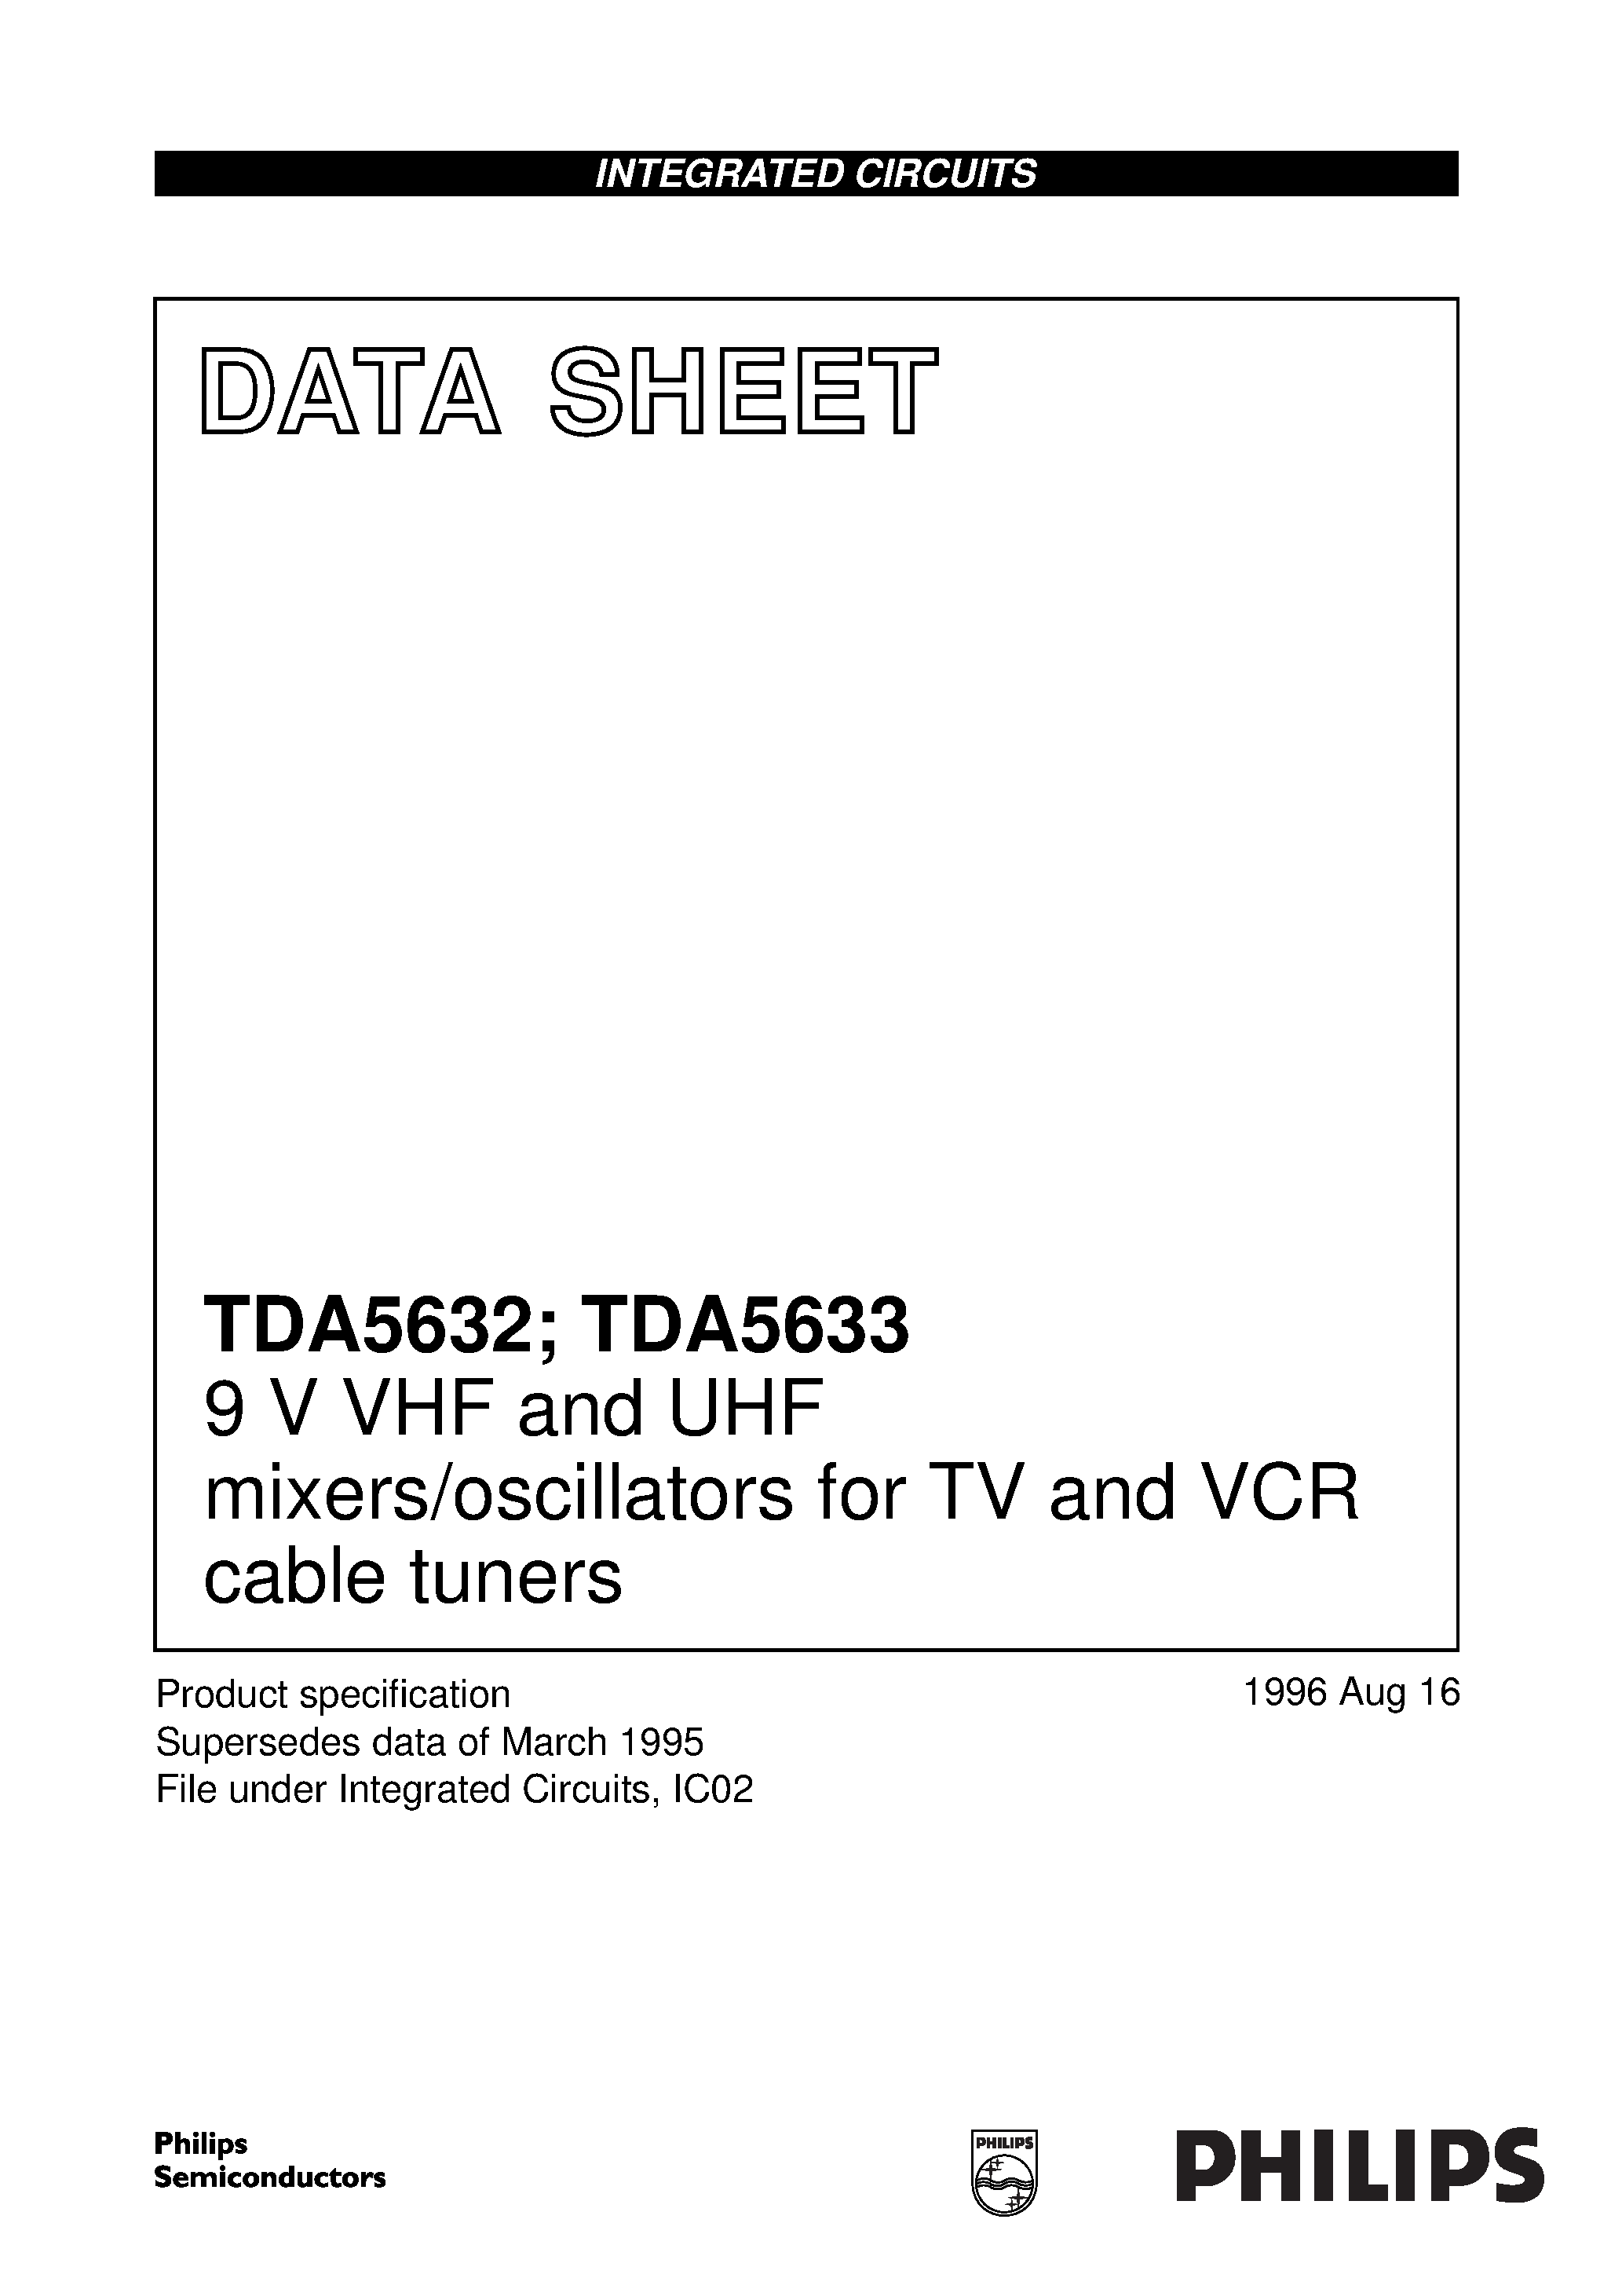 Datasheet TDA5632M - 9 V VHF and UHF mixers/oscillators for TV and VCR cable tuners page 1